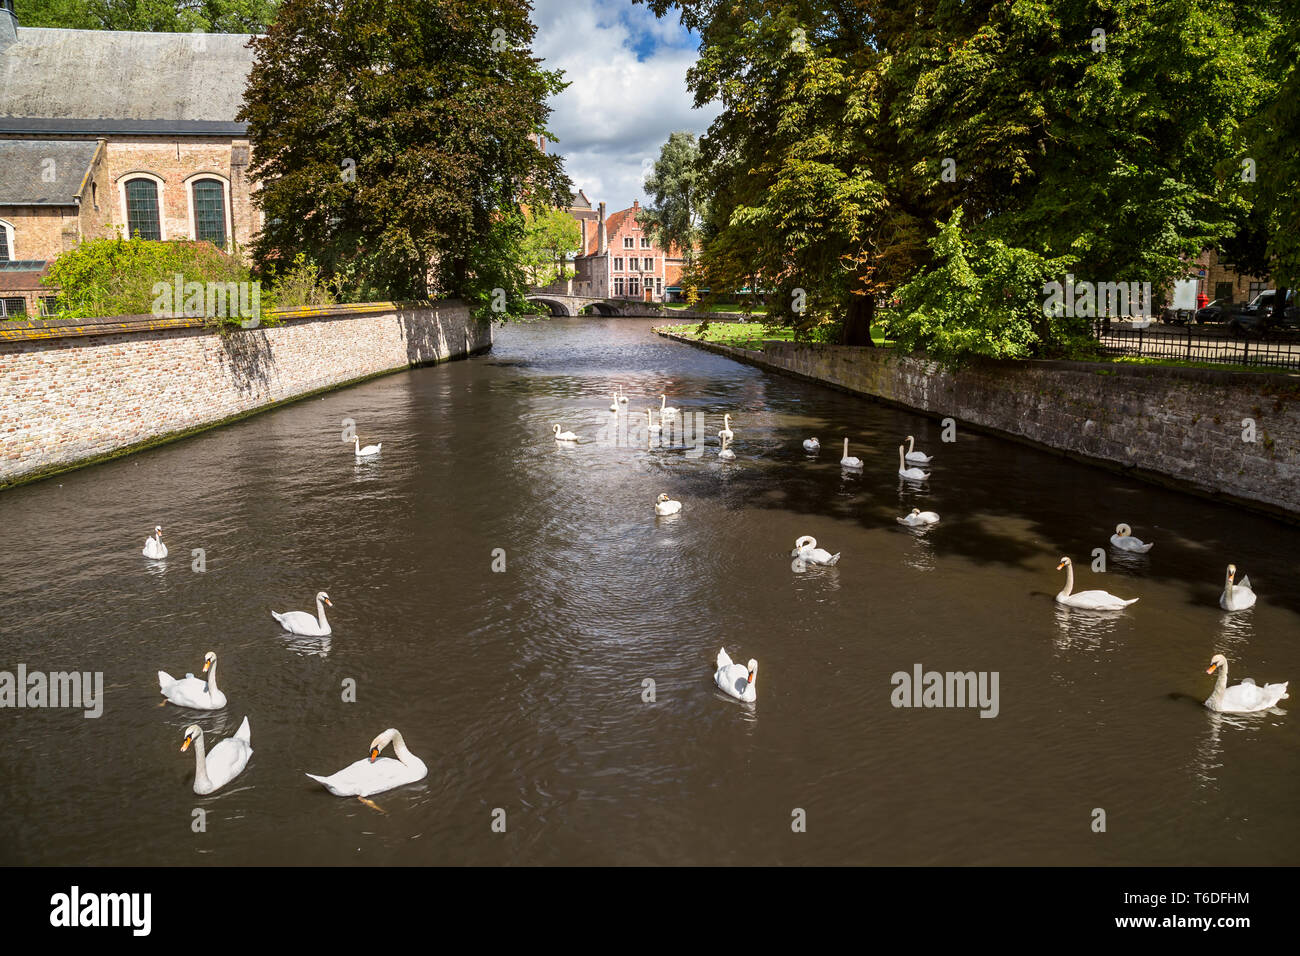 White swans in a river Stock Photo